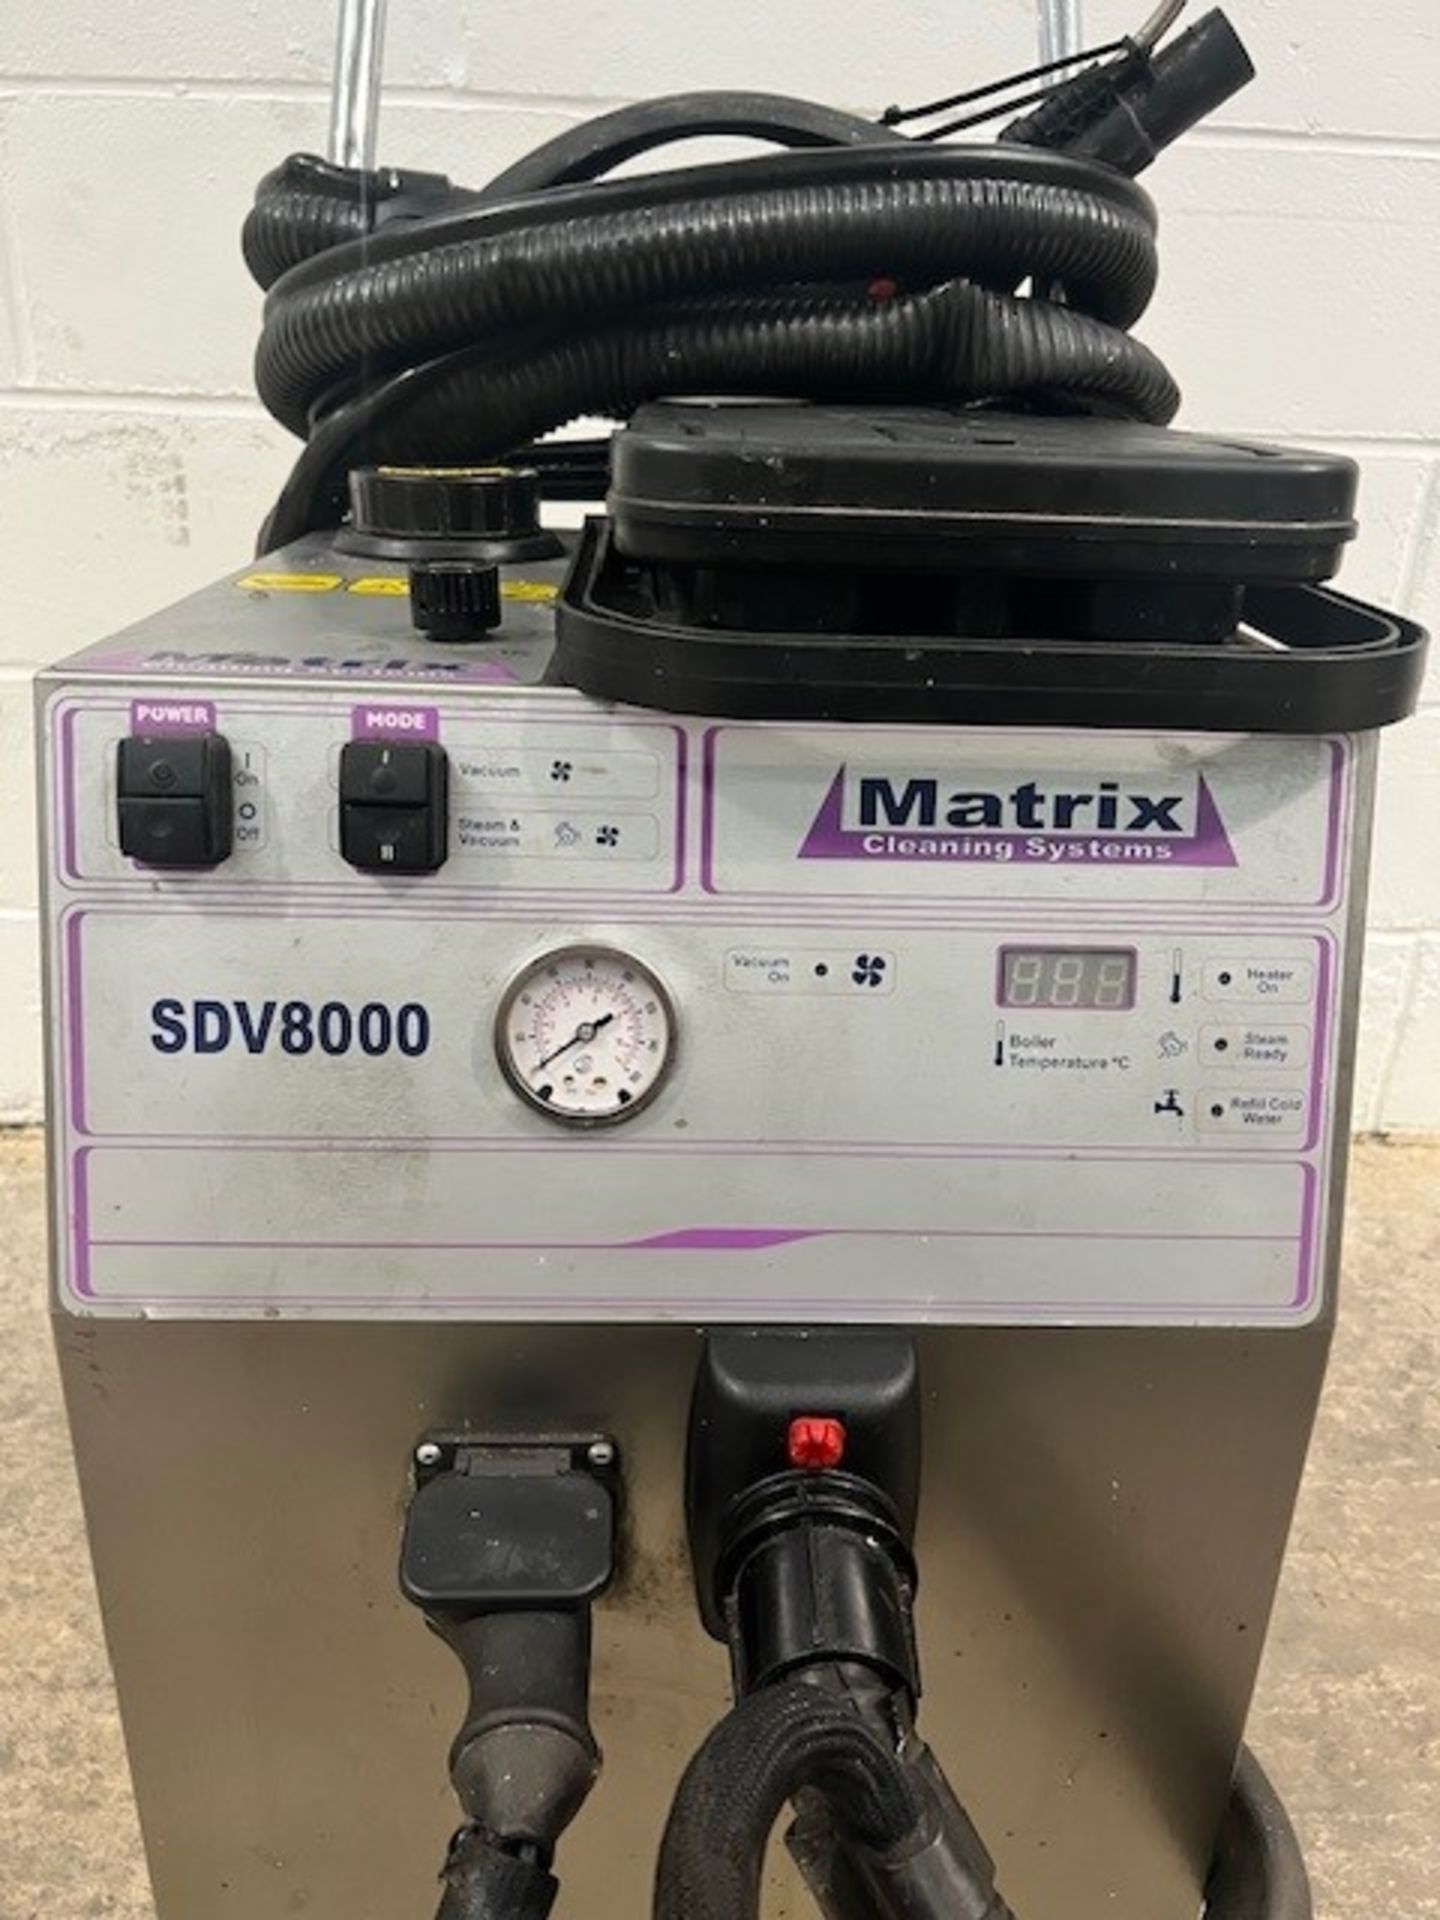 Matrix Cleaning System SDV8000 - Image 4 of 5